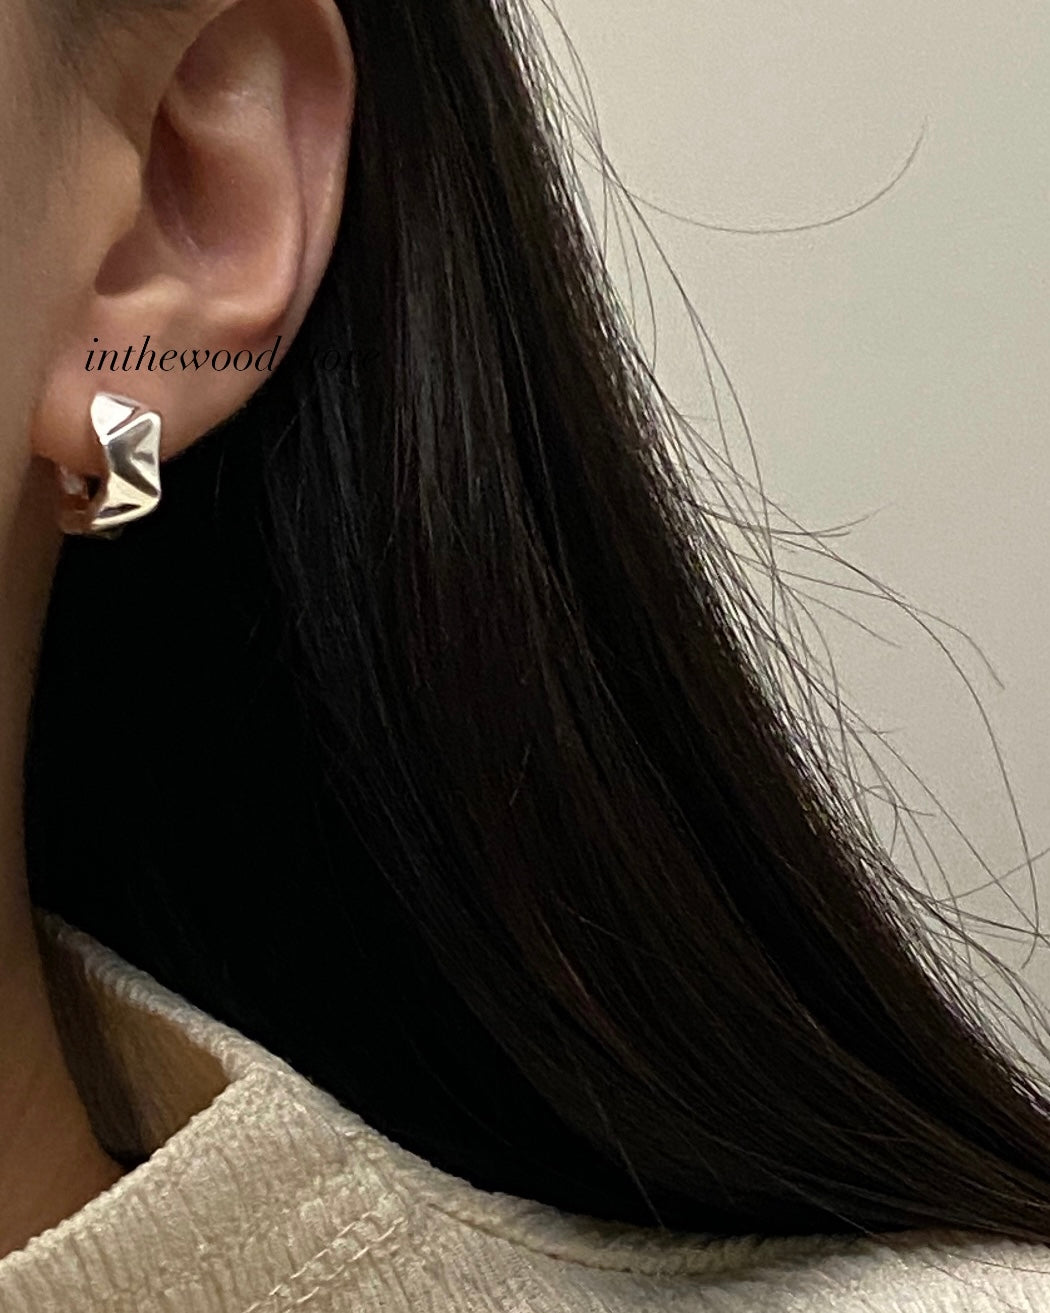 [925silver] Raw Paper One Touch Earrings